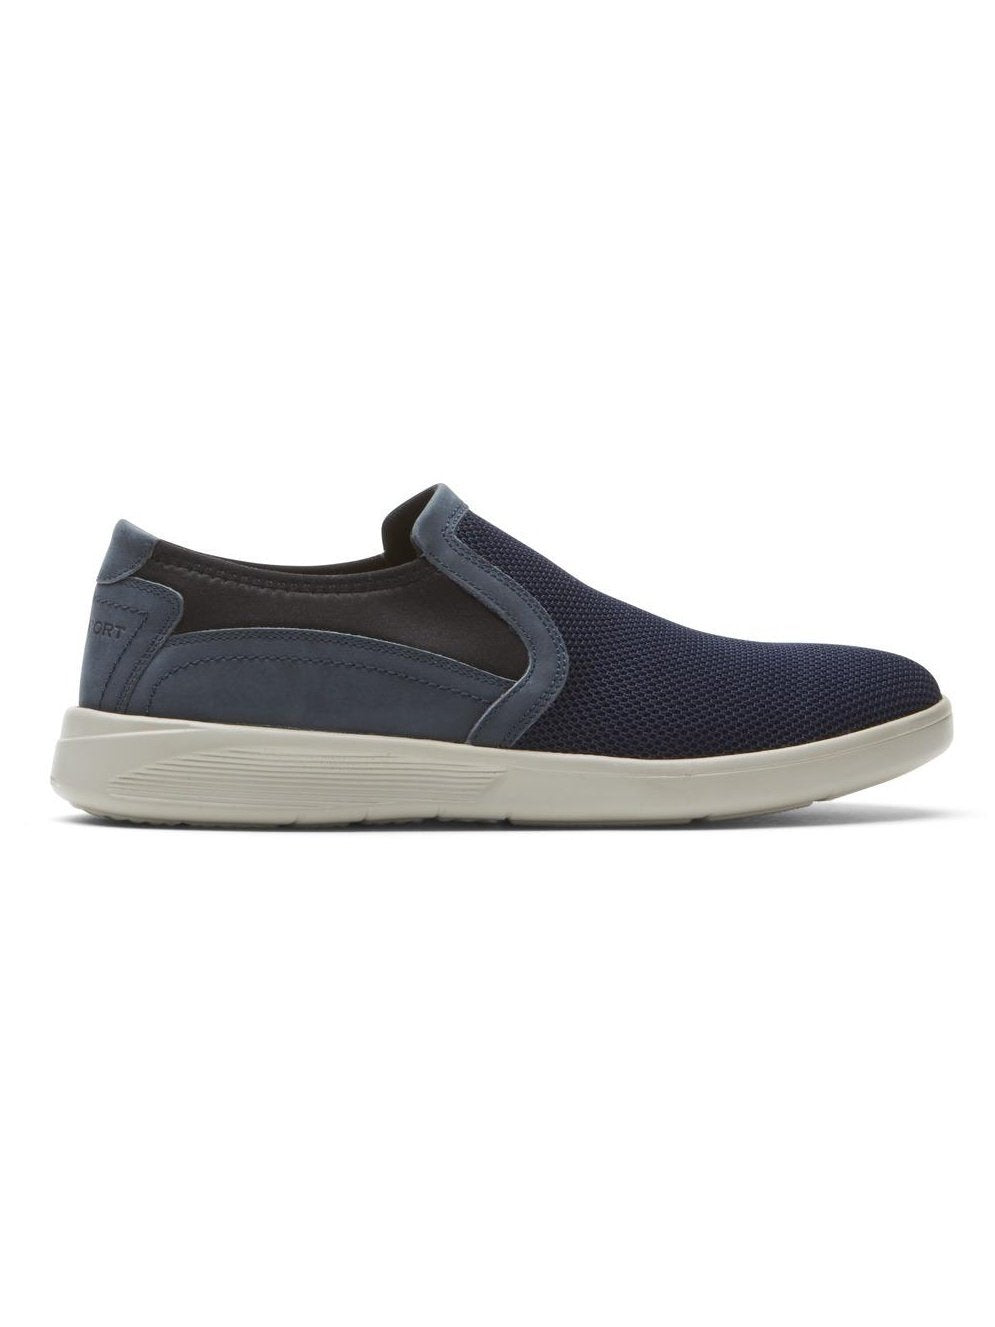 Rockport Men's Caldwell Twin Gore Slip-On Navy Mesh Leather CI3169.